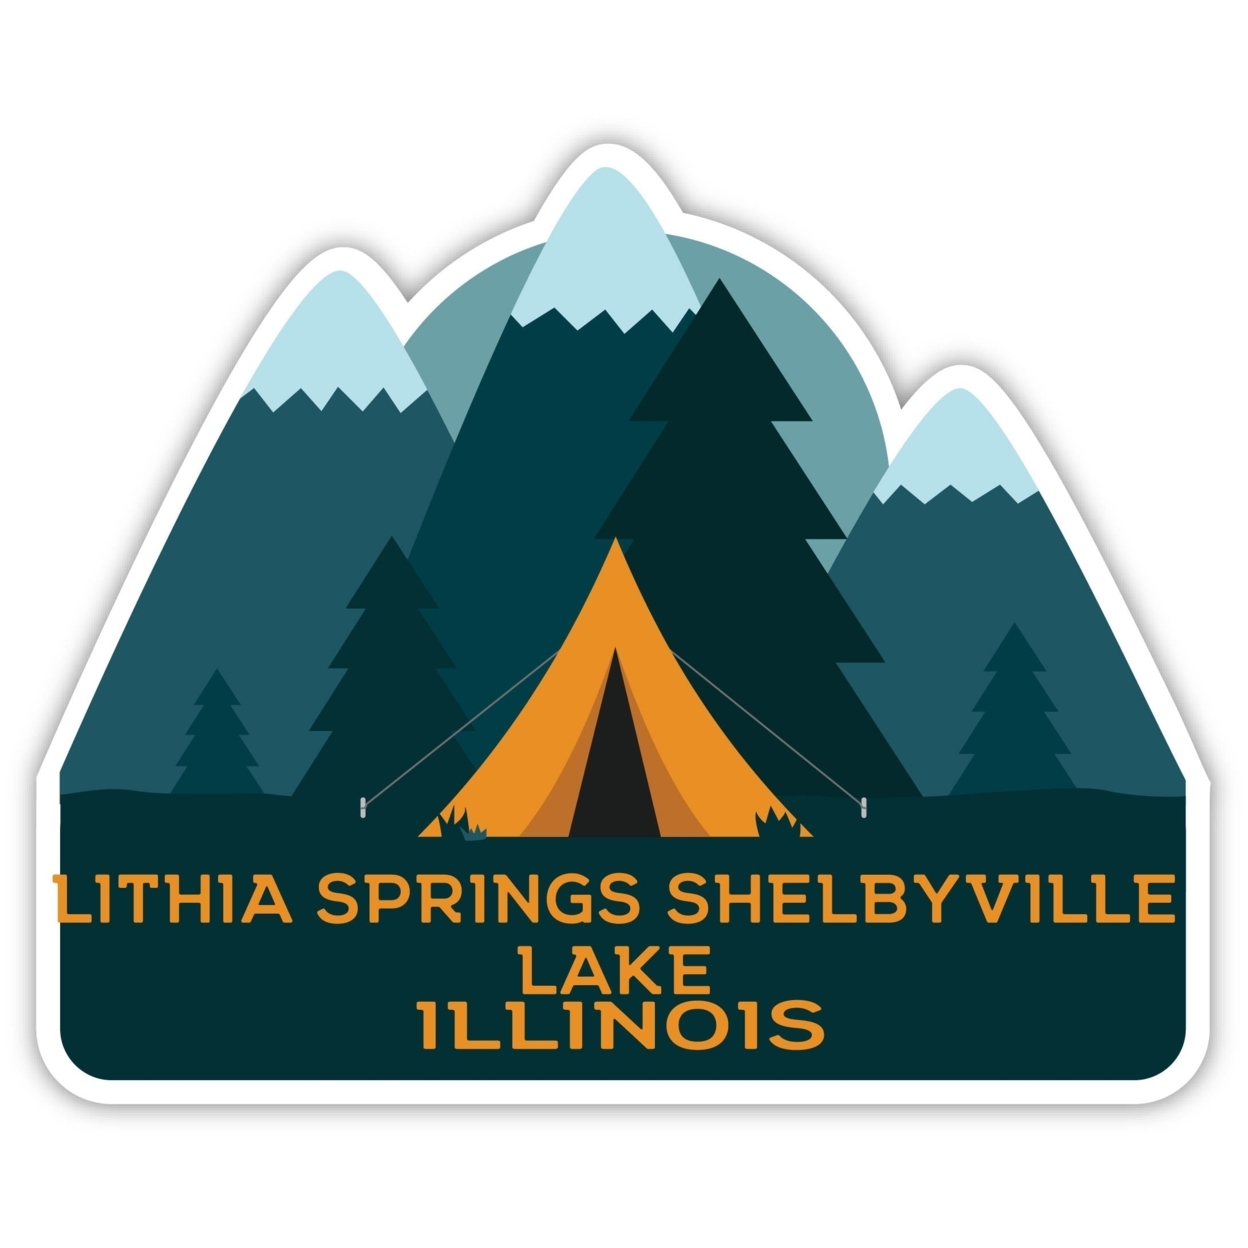 Lithia Springs Shelbyville Lake Illinois Souvenir Decorative Stickers (Choose Theme And Size) - 4-Inch, Tent